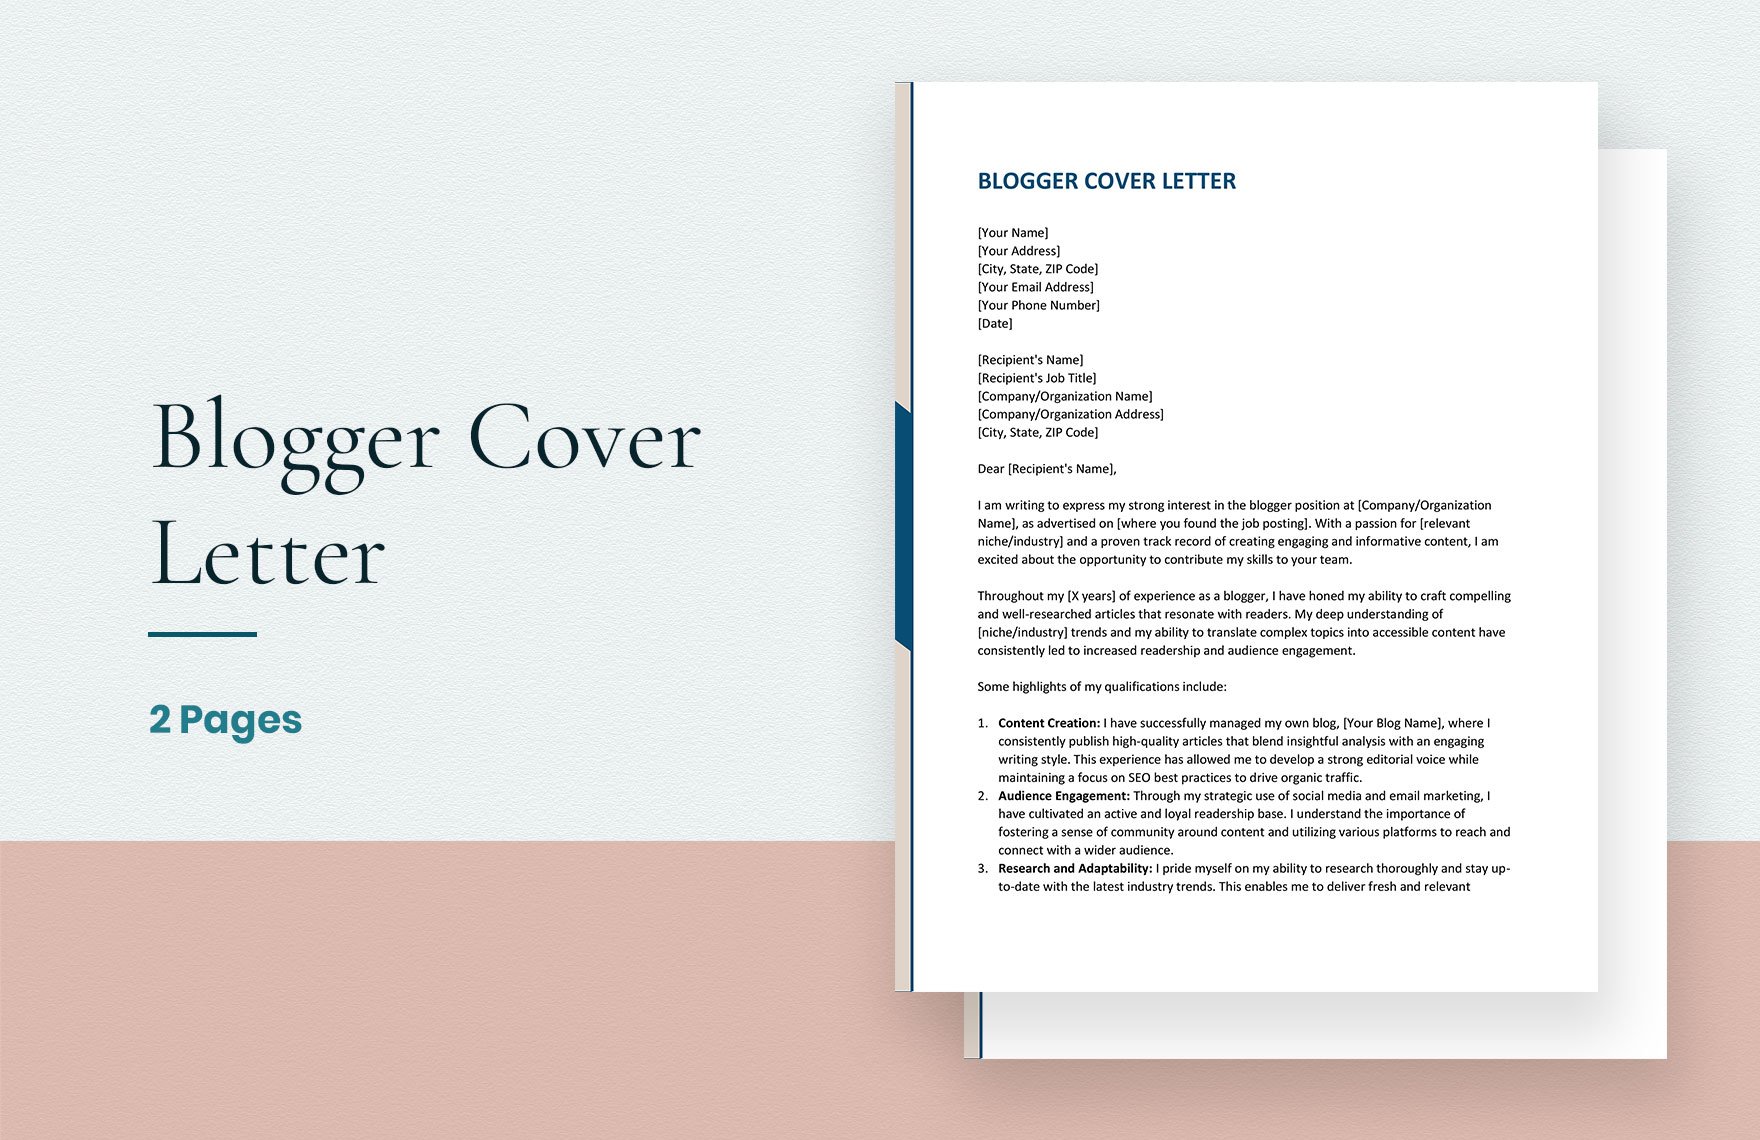 Blogger Cover Letter in Word, Google Docs, Apple Pages